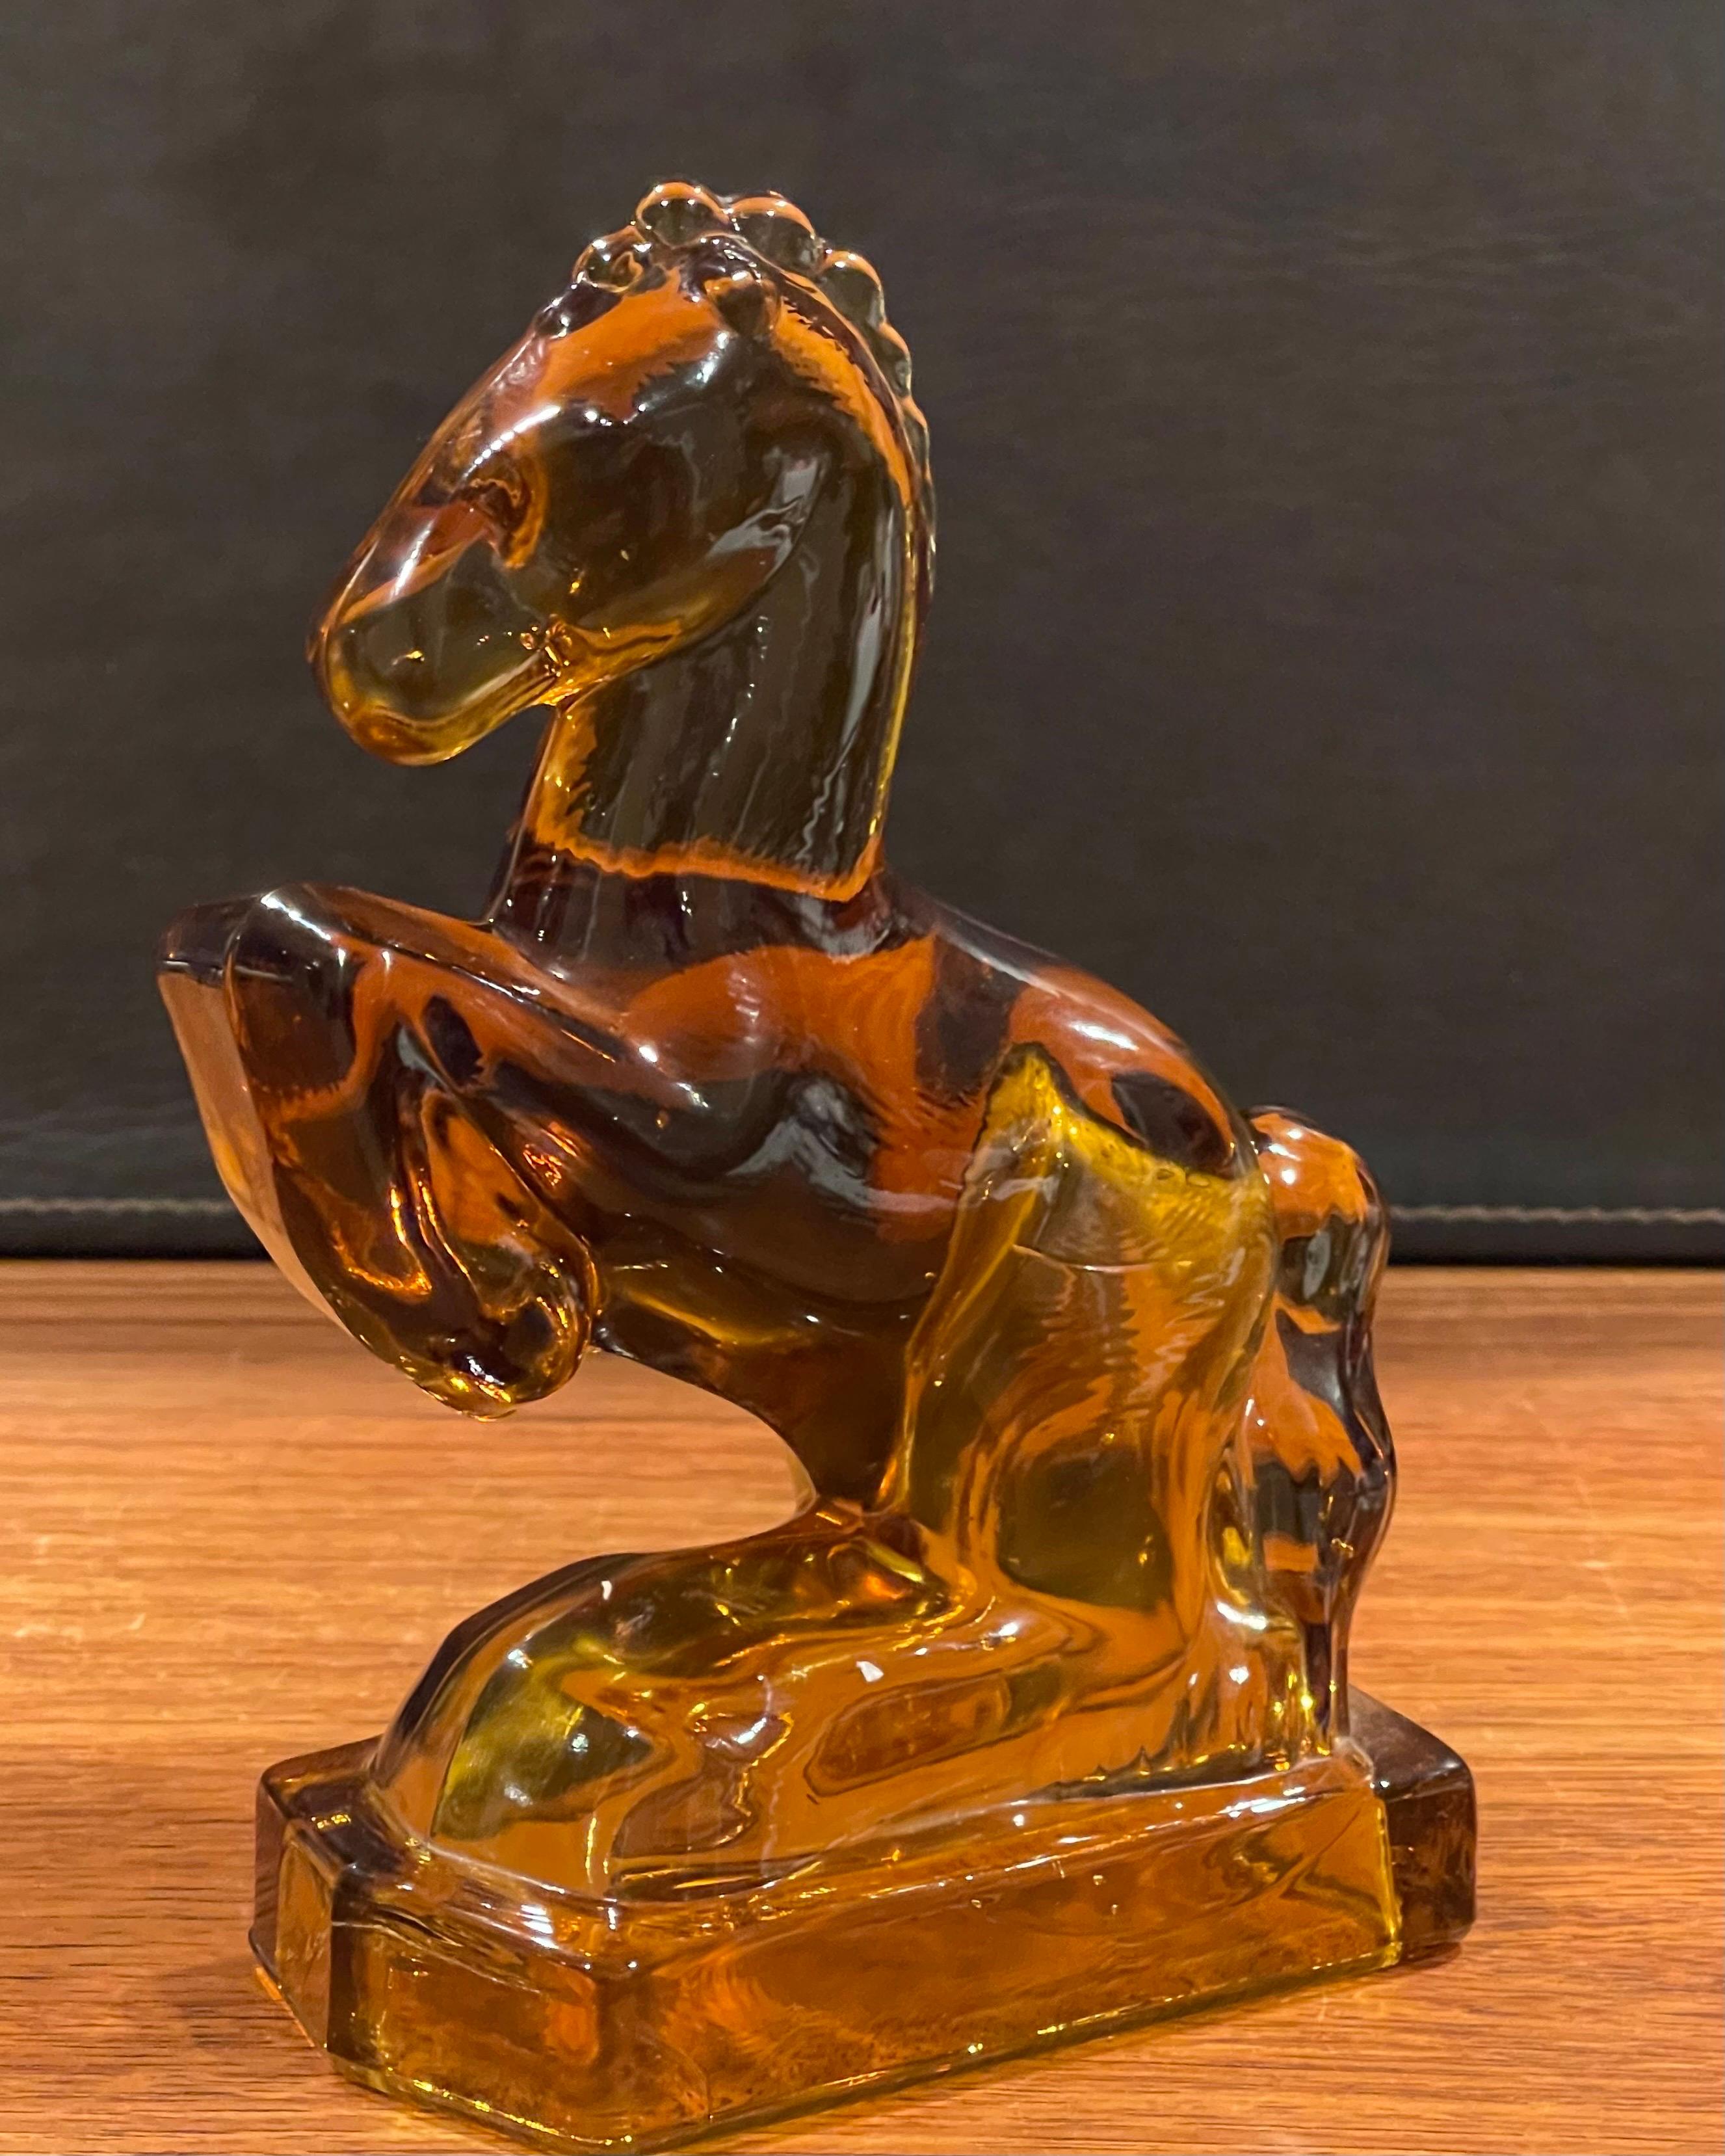 An amber glass galloping horse sculpture / bookend by L.E. Smith Glass Company, circa 1990s. The piece is in very good condition with no chips or cracks and measure 6